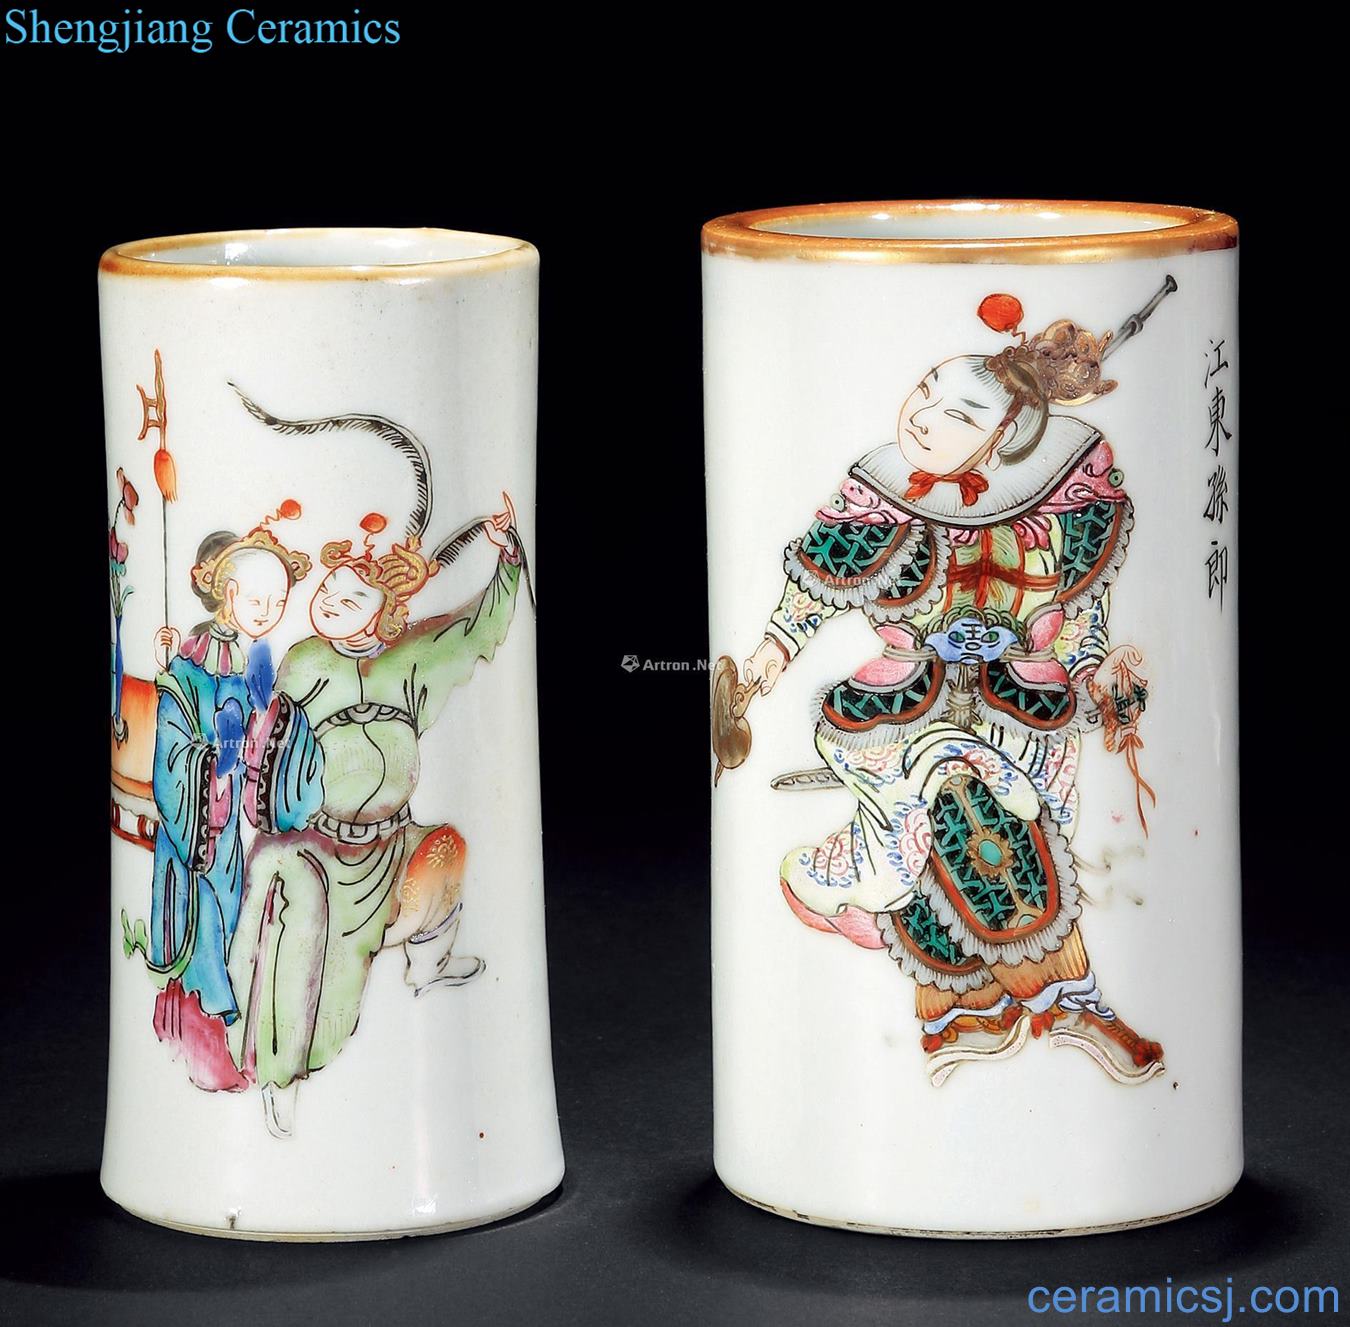 Dajing pastel one like spectrum, opera characters pen container (two)